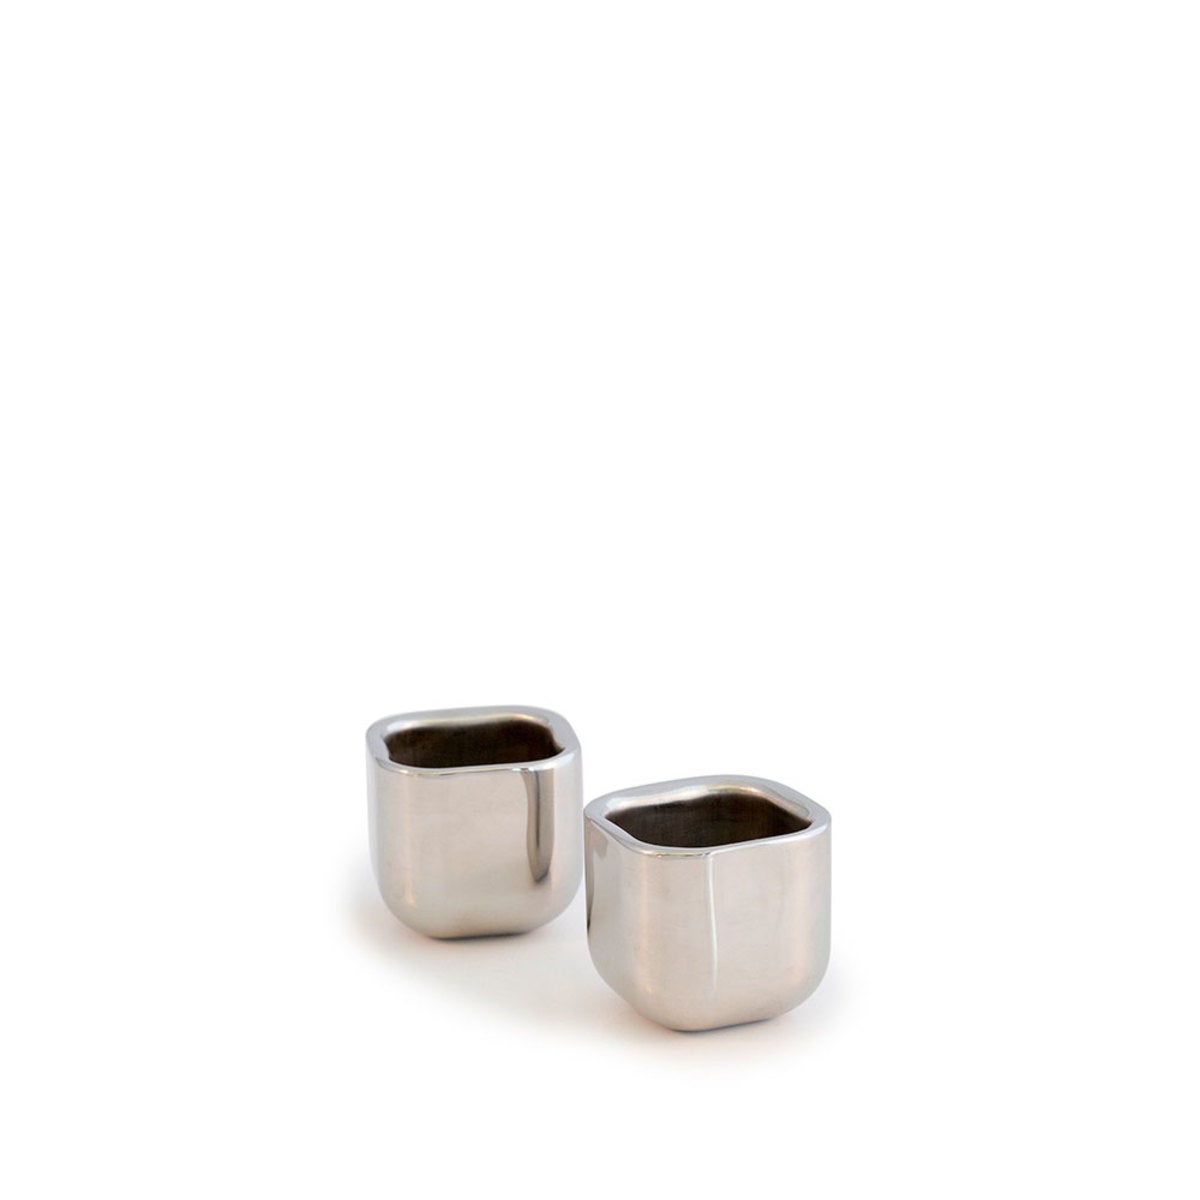 Stainless Steel Square Shot Glass, Set of 2